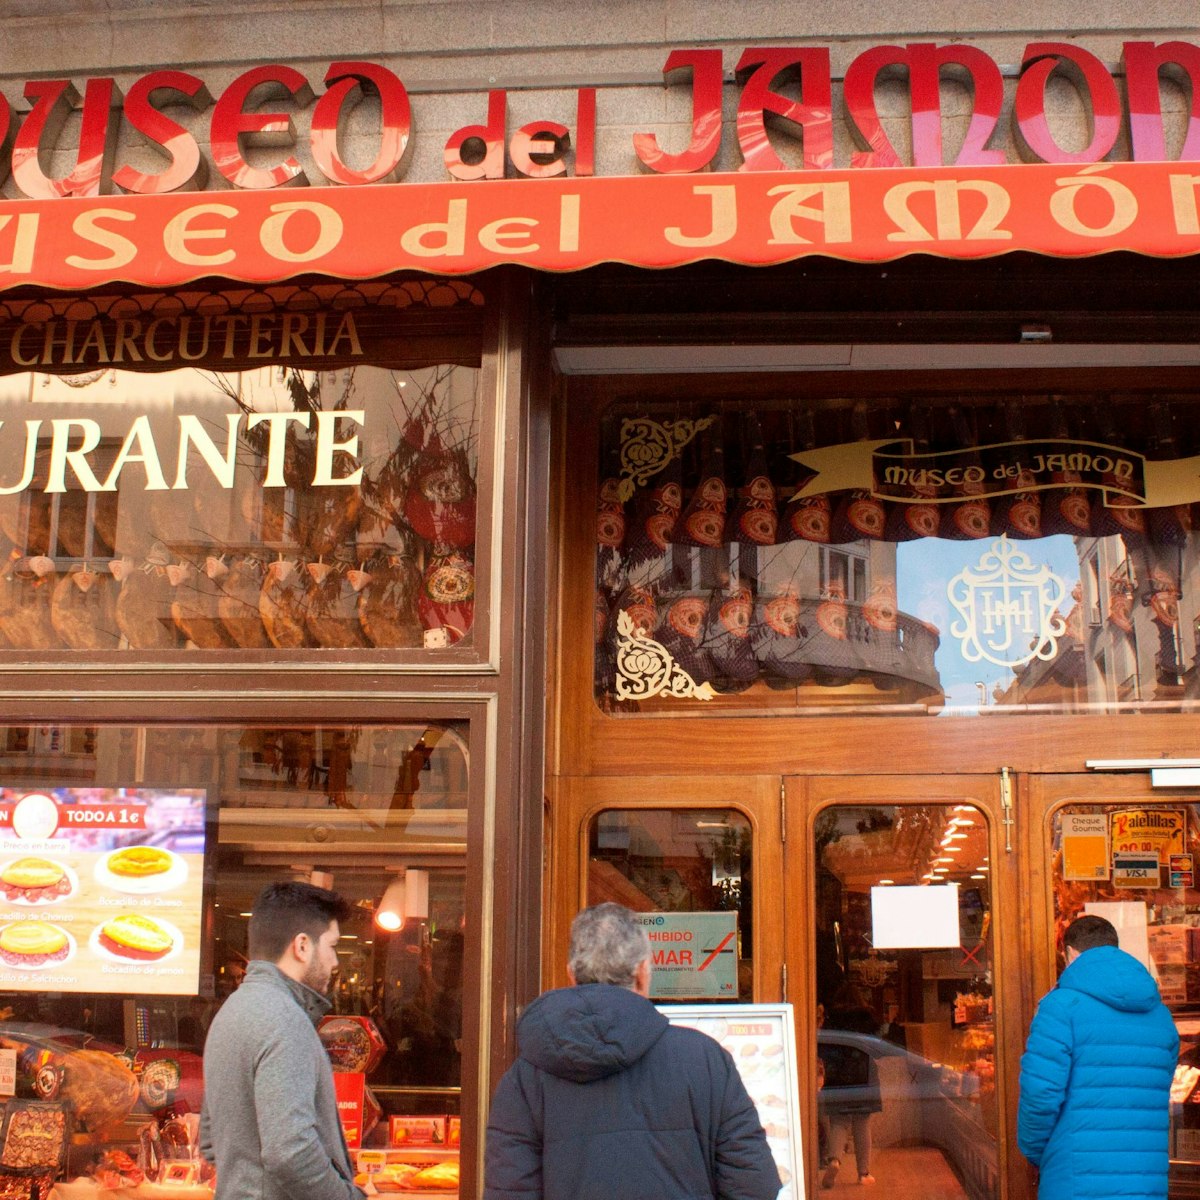 Bountiful pork products vie for attention at the Museo del Jamón.